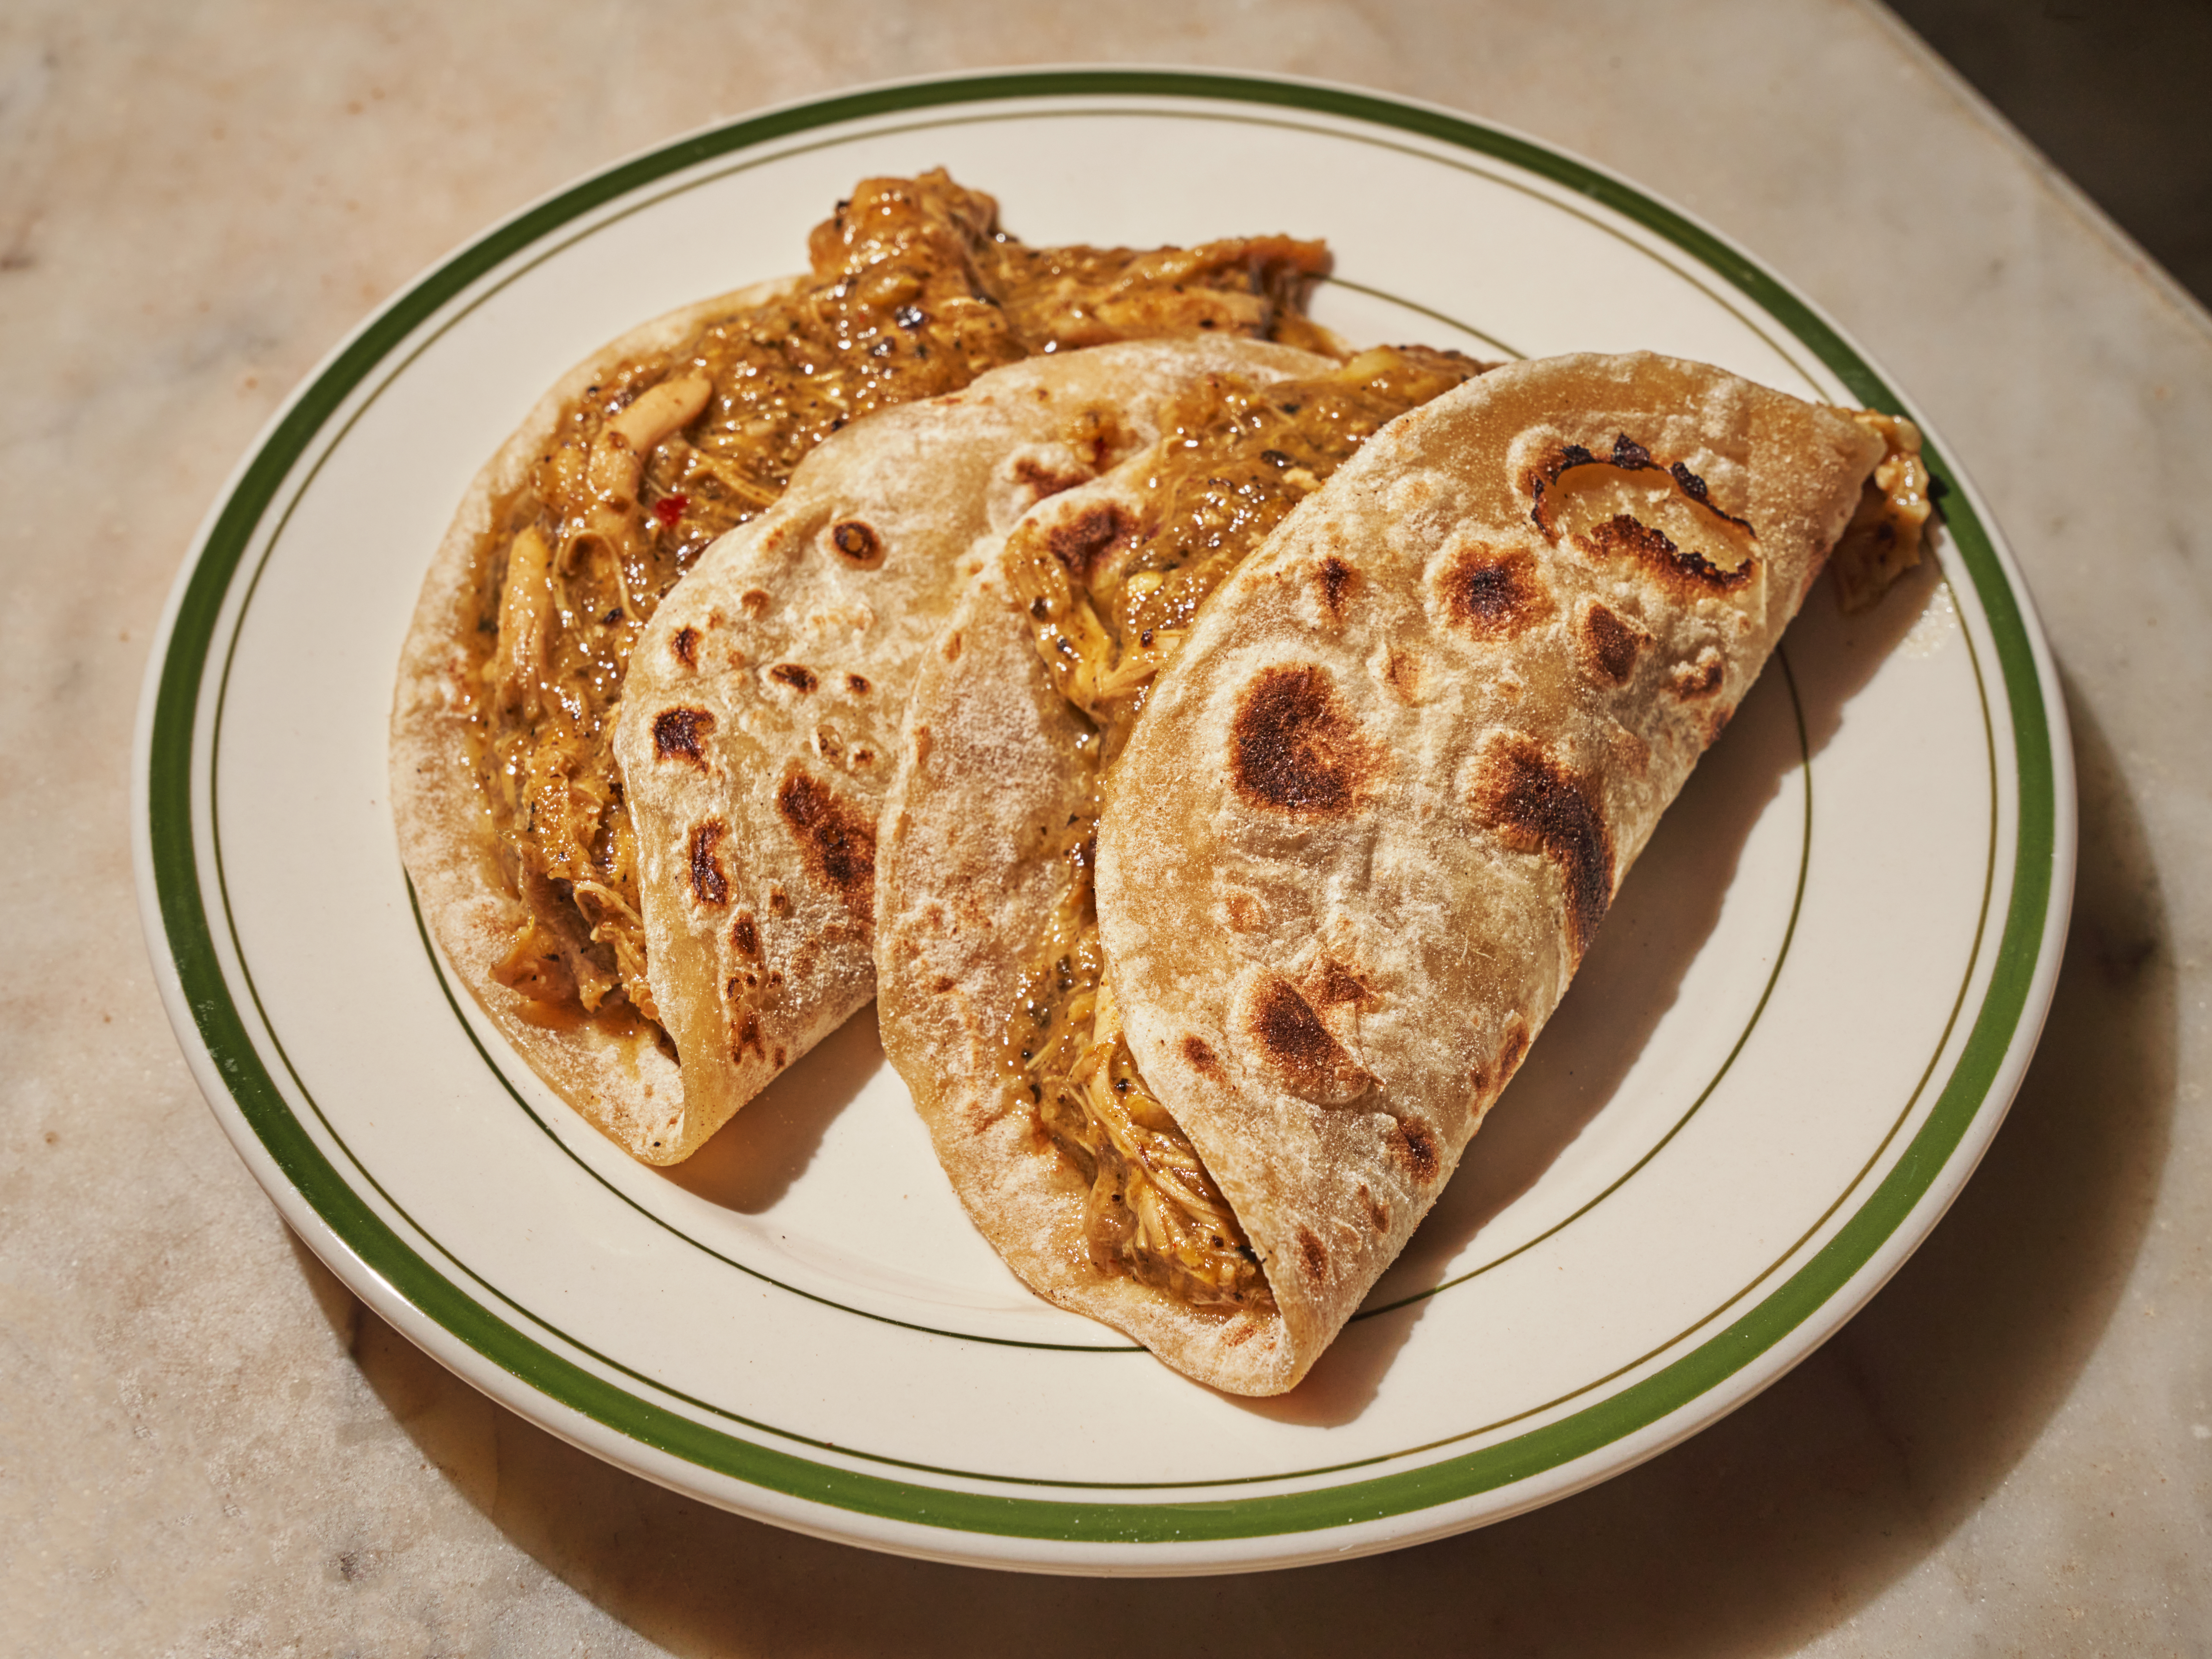 Two lightly charred flour tortillas are stuffed with pollo guisado on a plate